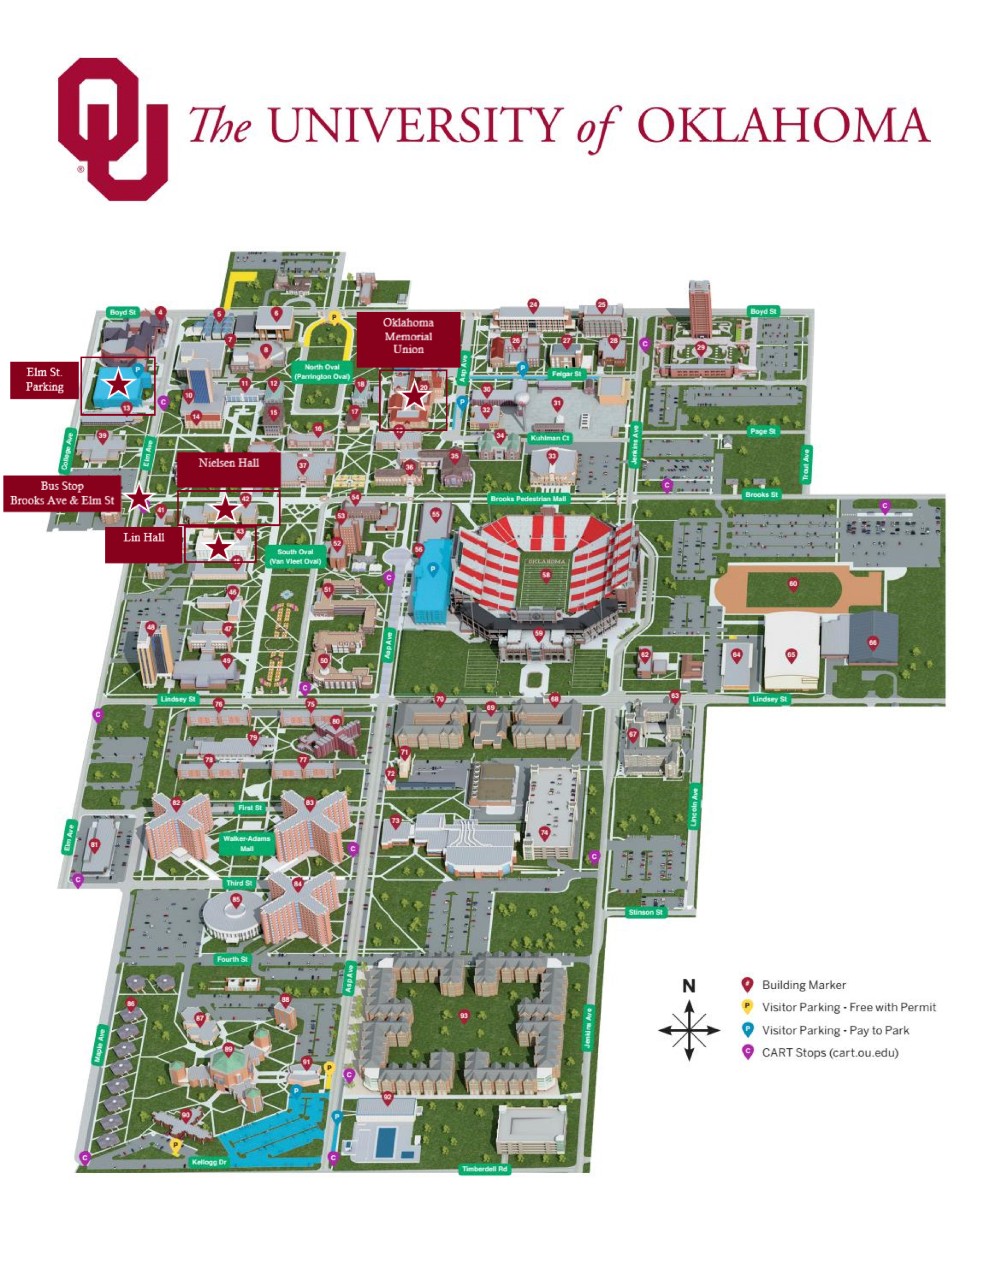 University of Oklahoma campus map with the Oklahoma Memorial Union, Elm St. Parking, Nielsen Hall, and Lin Hall highlighted.